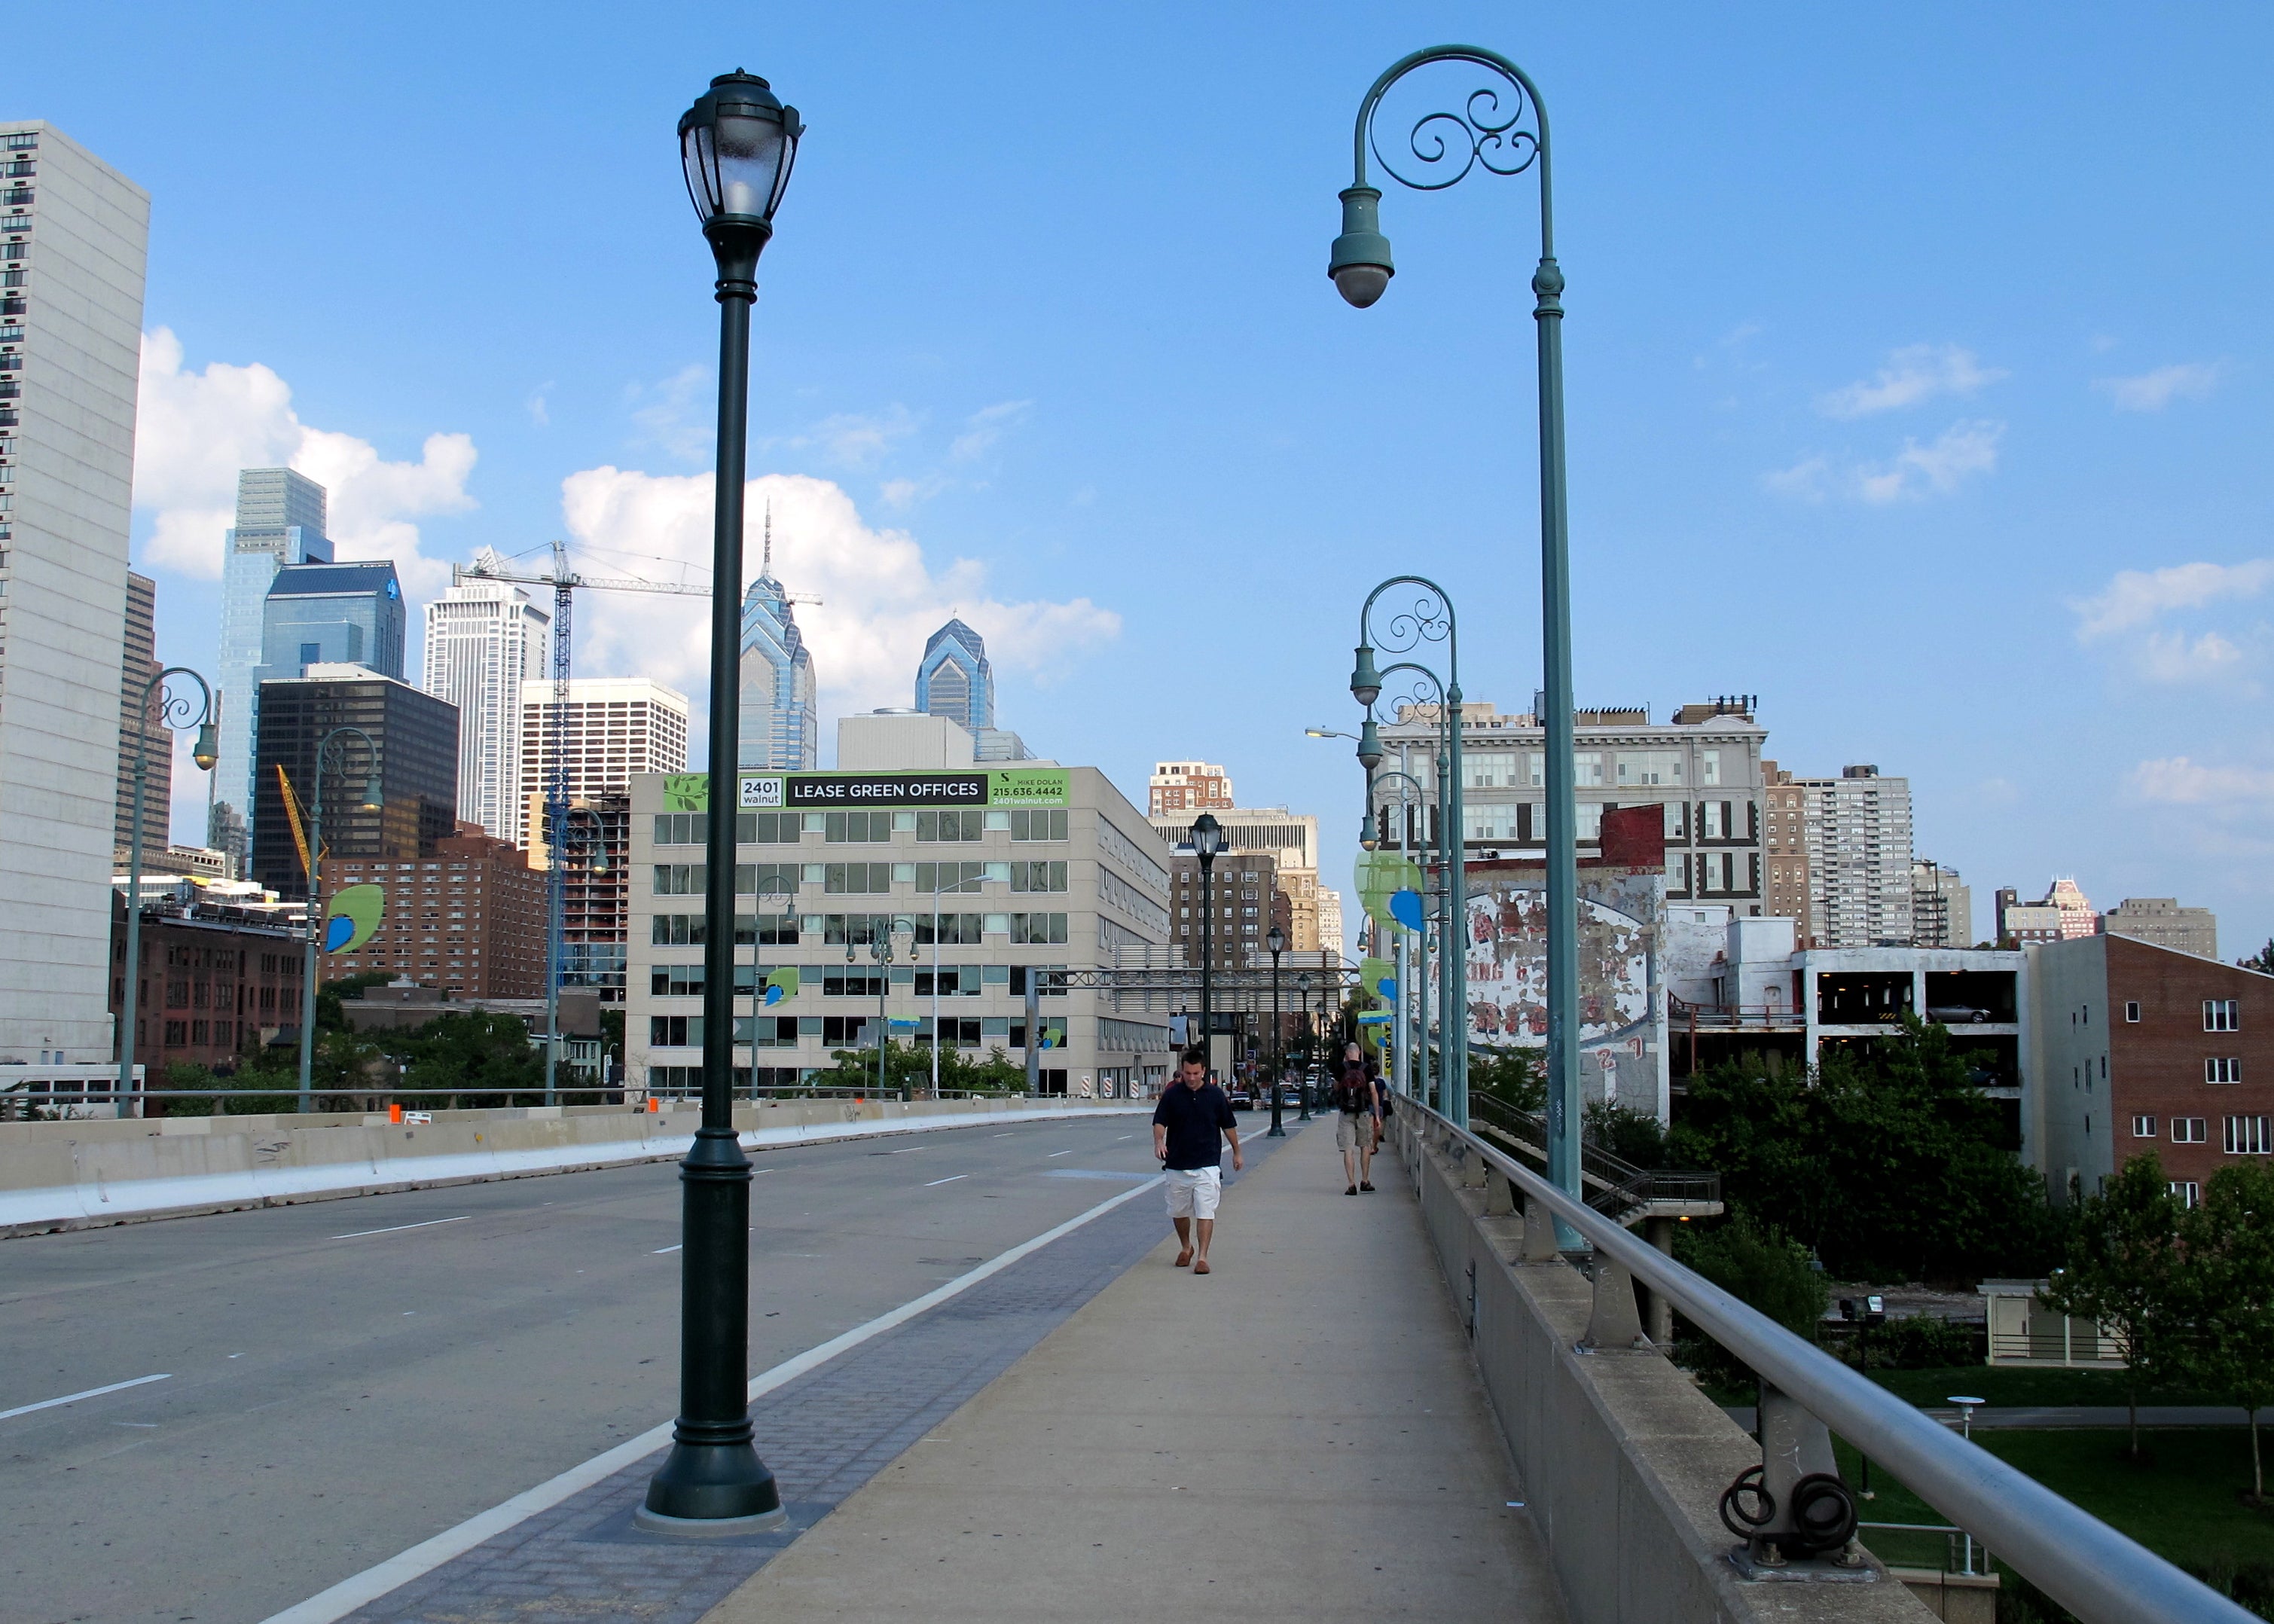 The redesigned Walnut Street Bridge has wider sidewalks, better pedestrian lighting, and (soon) a buffered bike lane. Construction will be finished this week.